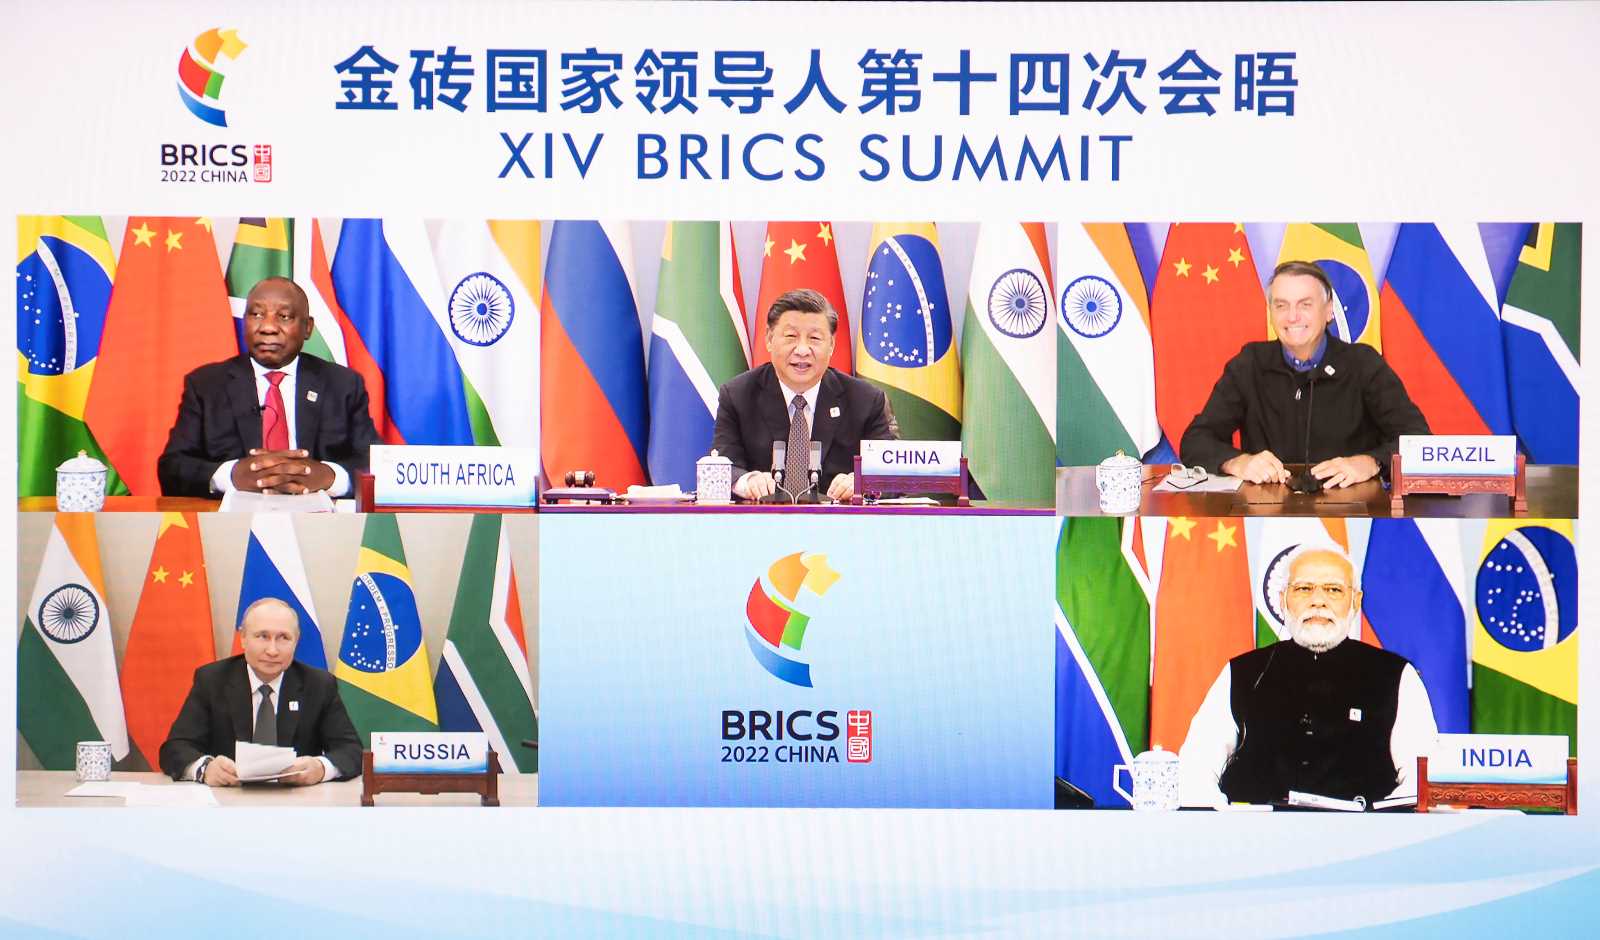 This year’s BRICS summit was a digitised event.